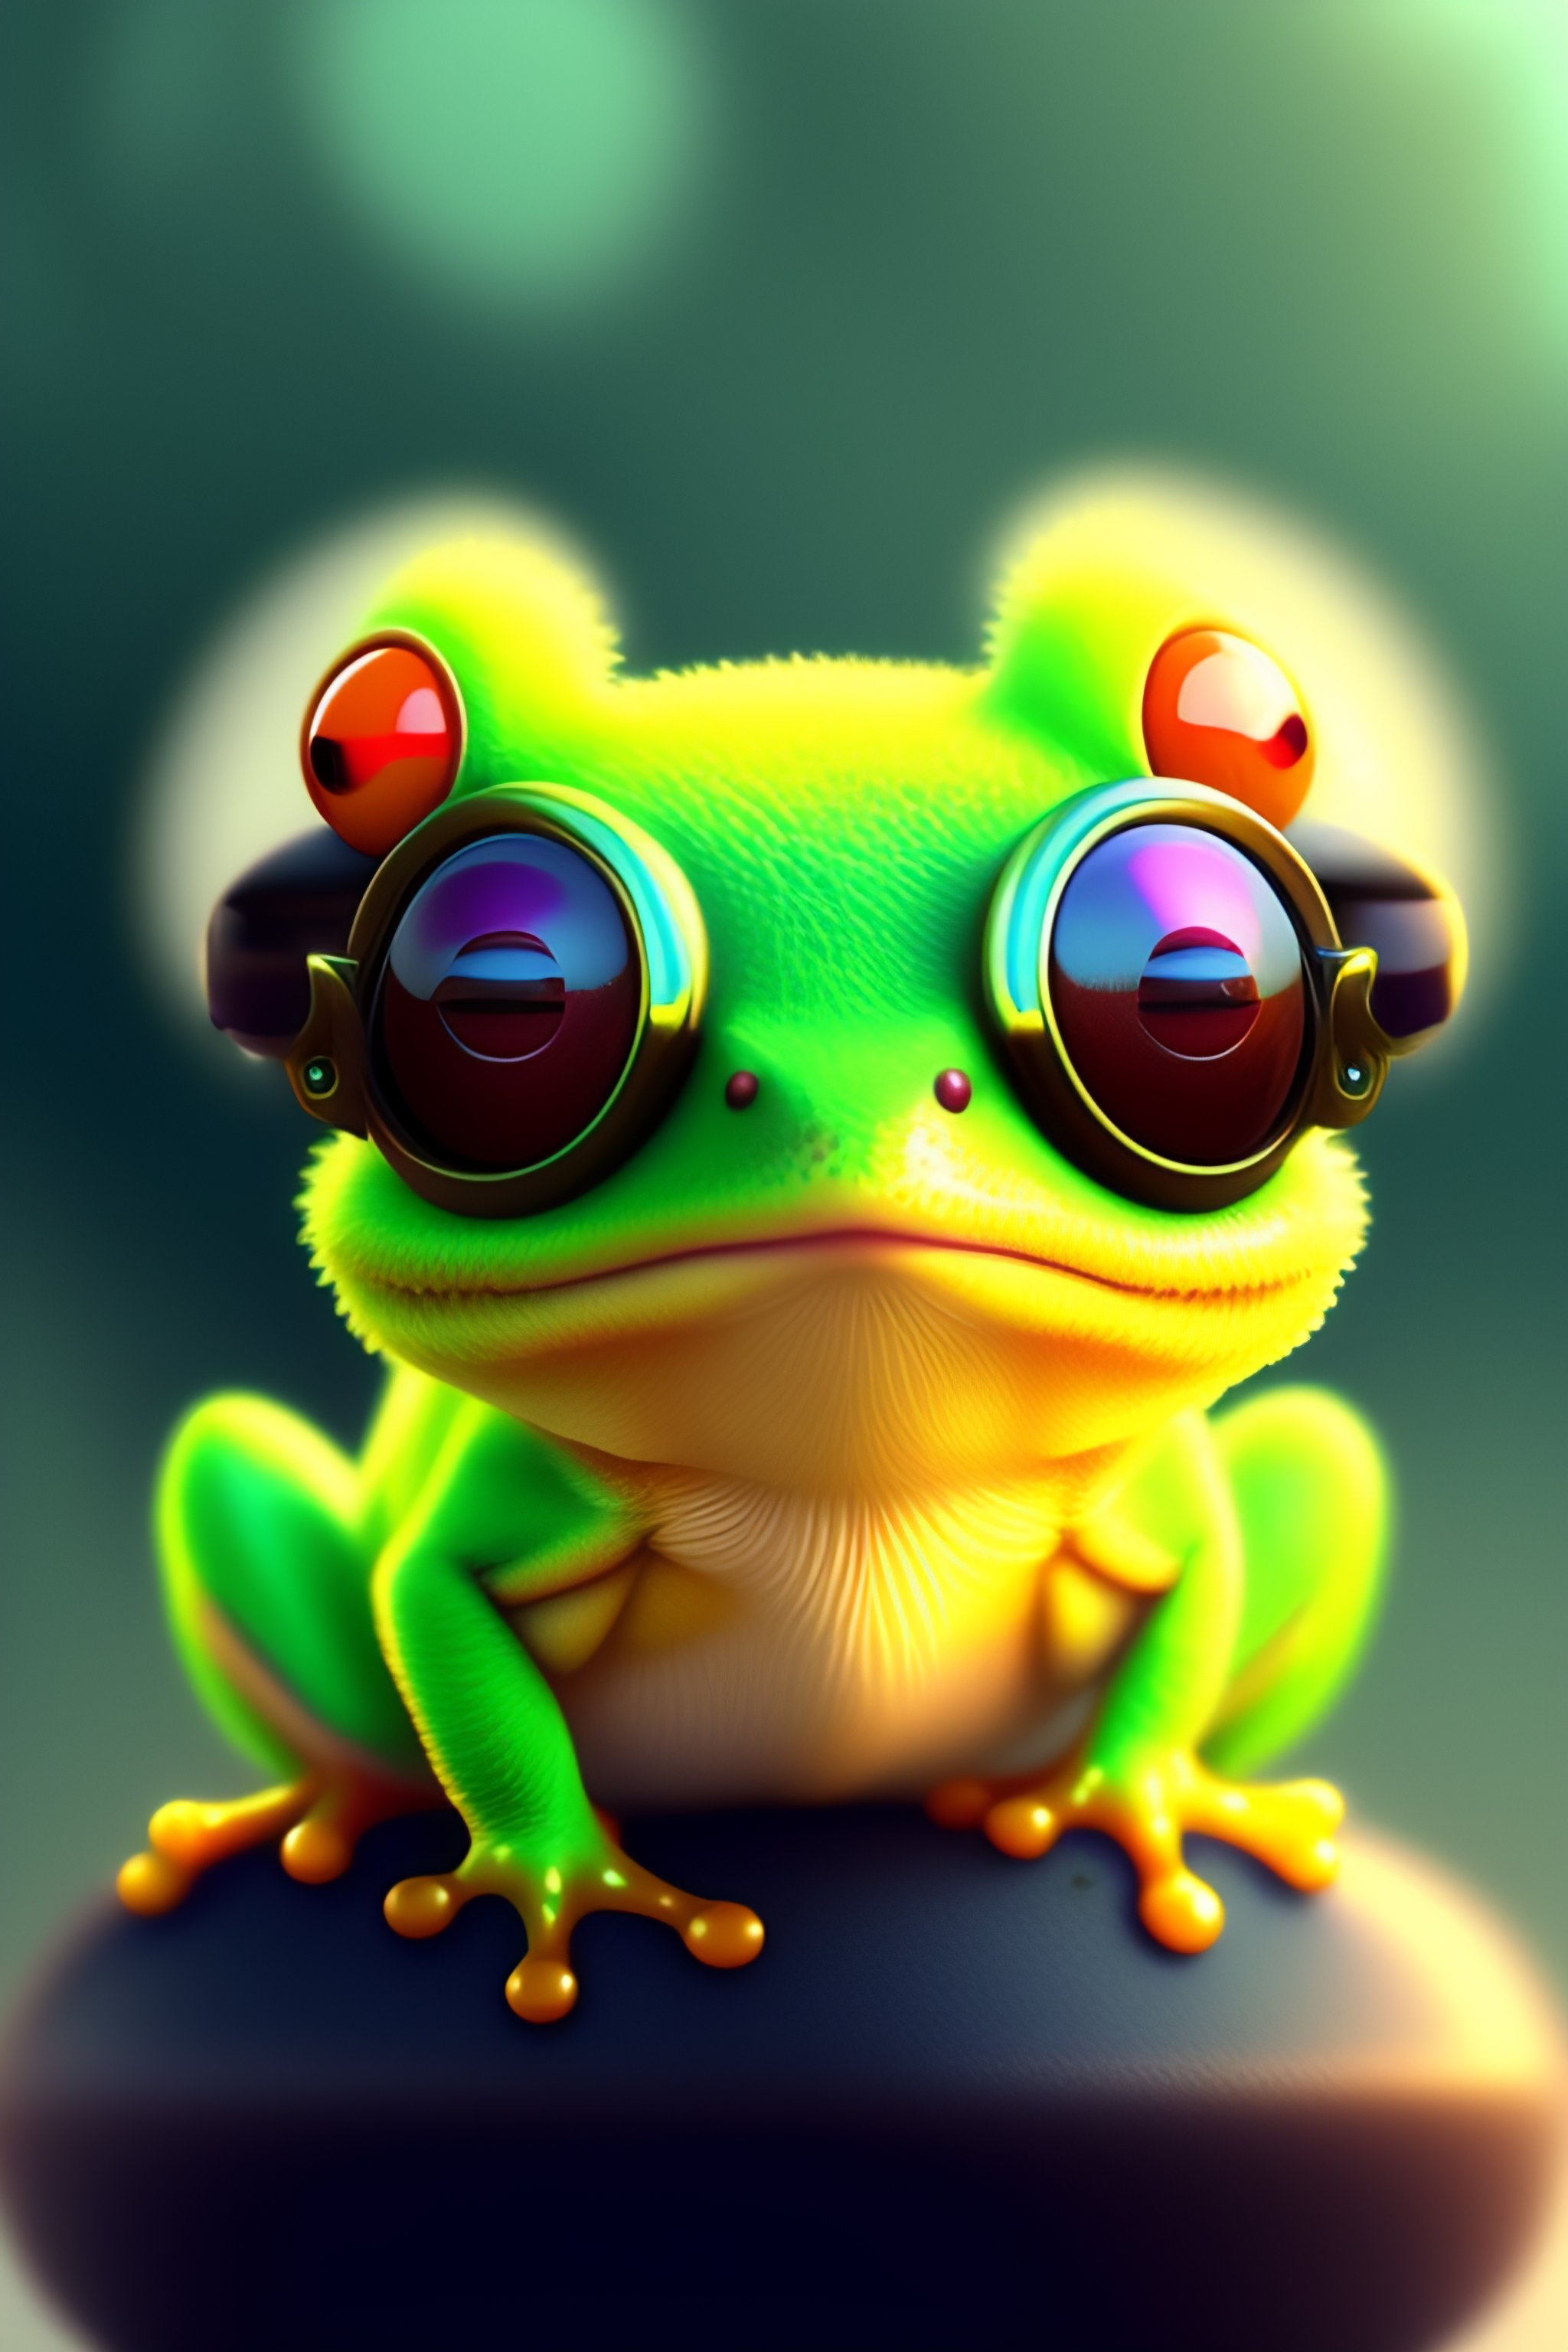 Lexica - Cute and adorable cartoon fluffy baby frog, wearing a